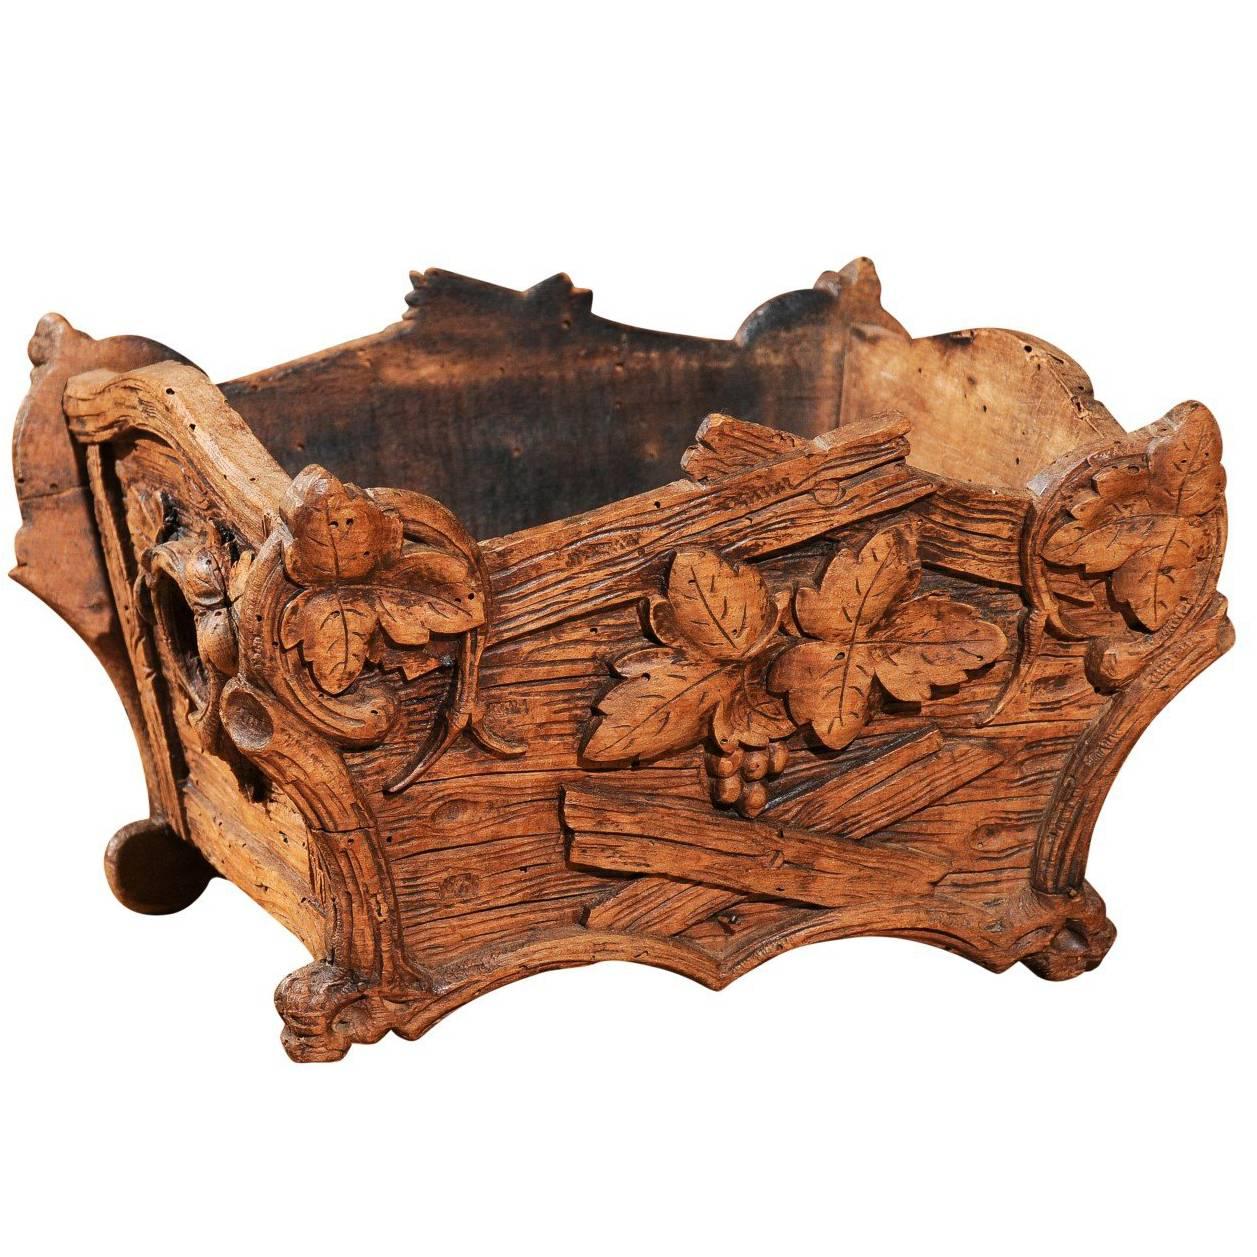 Rustic Black Forest Jardinière with Carved Foliage and Branch Motifs, 1920s